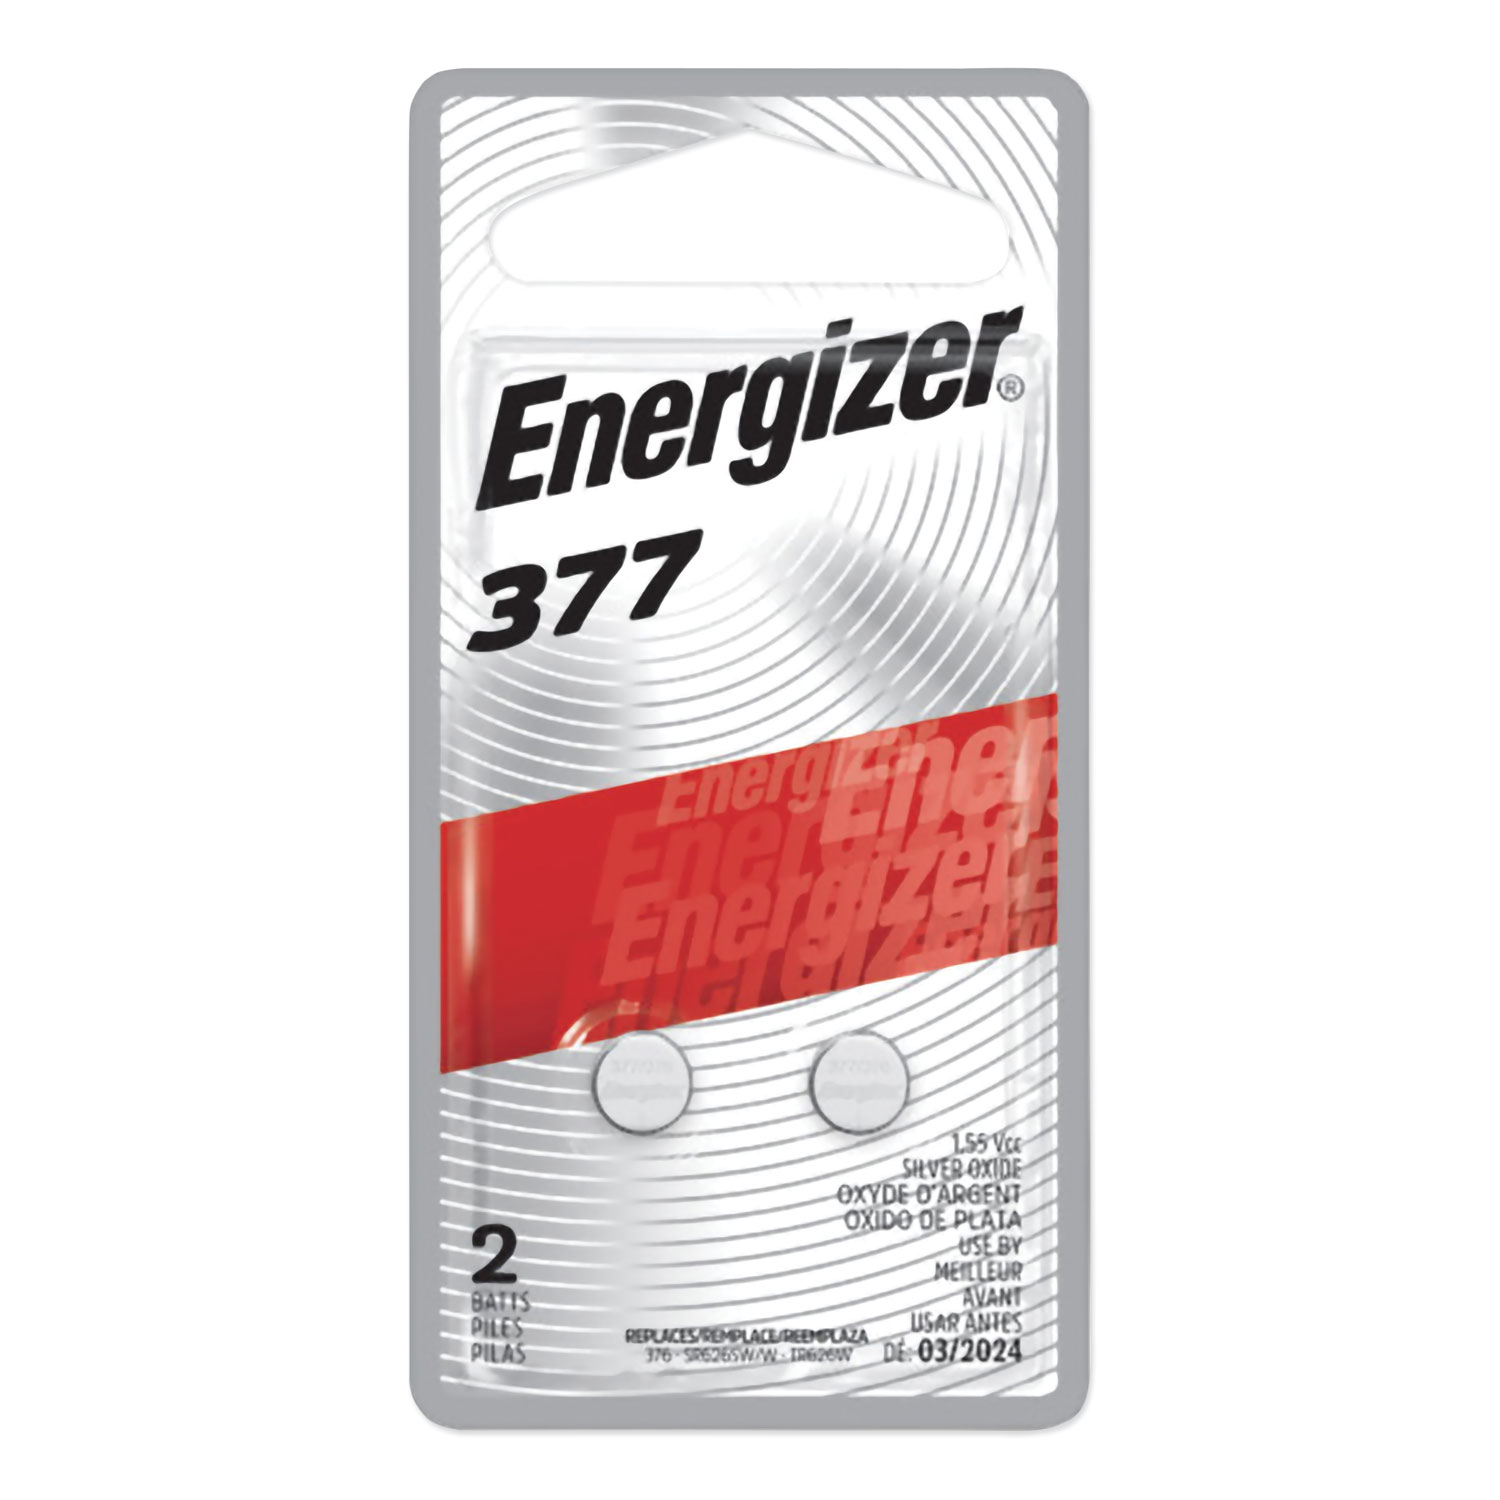  Energizer 377BPZ-2 377 Silver Oxide Button Cell Battery, 1.5V, 2/Pack (EVE377BPZ2) 